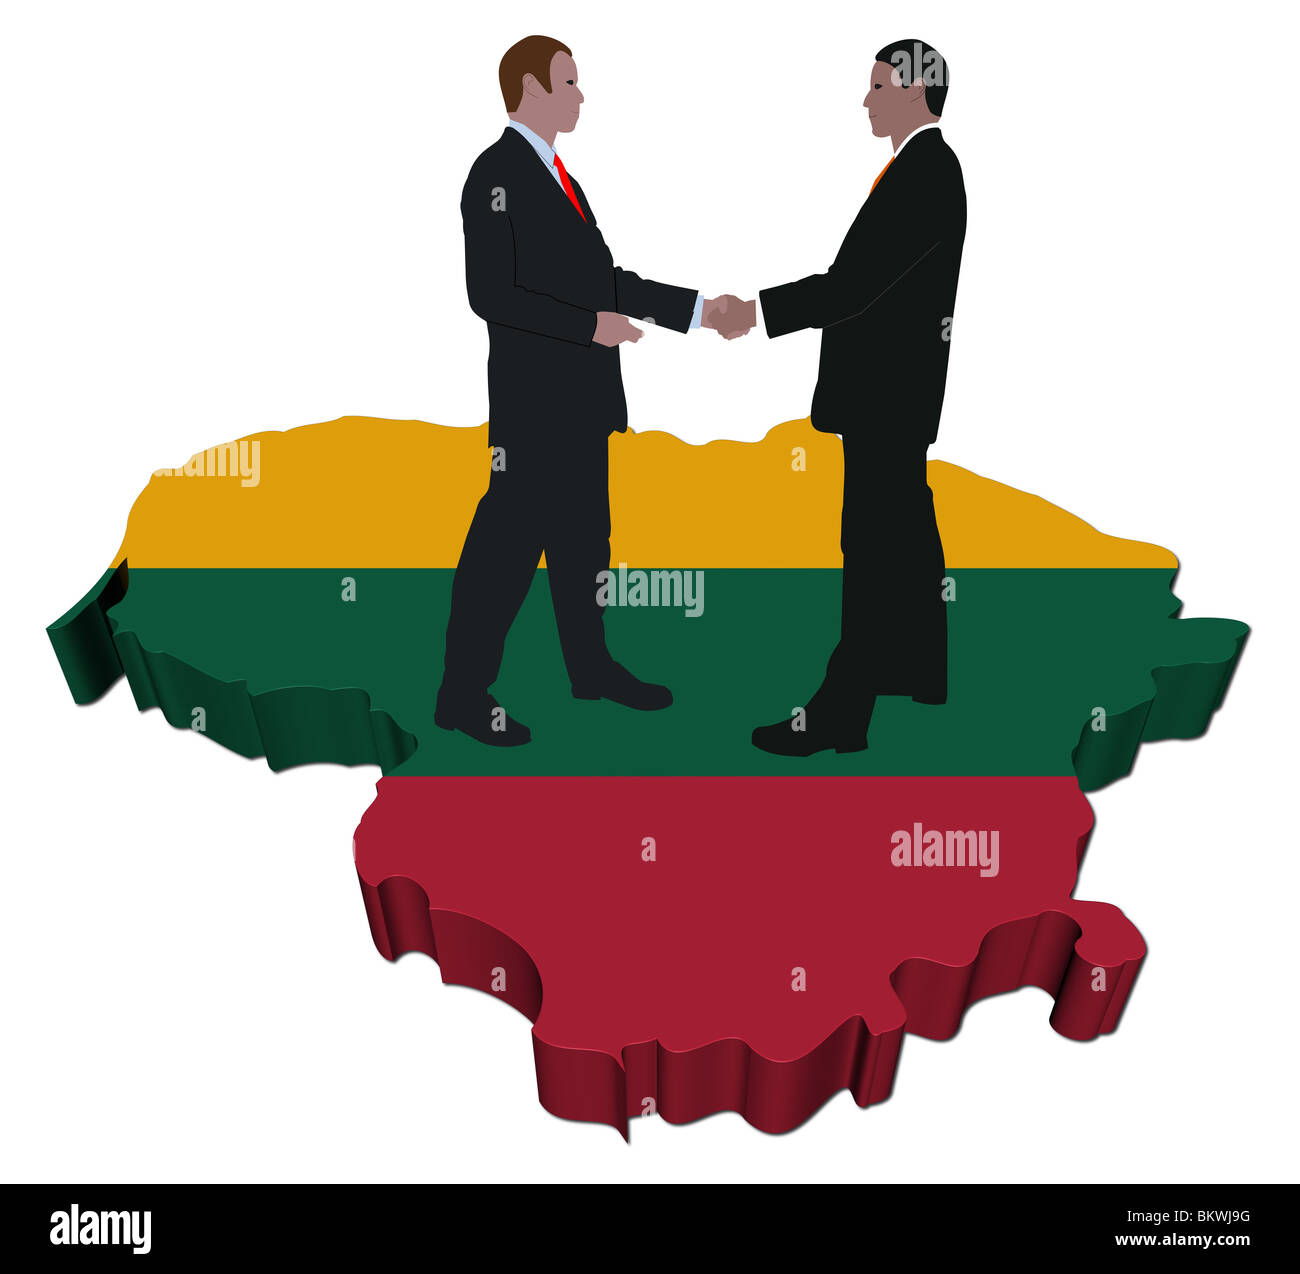 Business people shaking hands on Lithuania map flag illustration Stock Photo